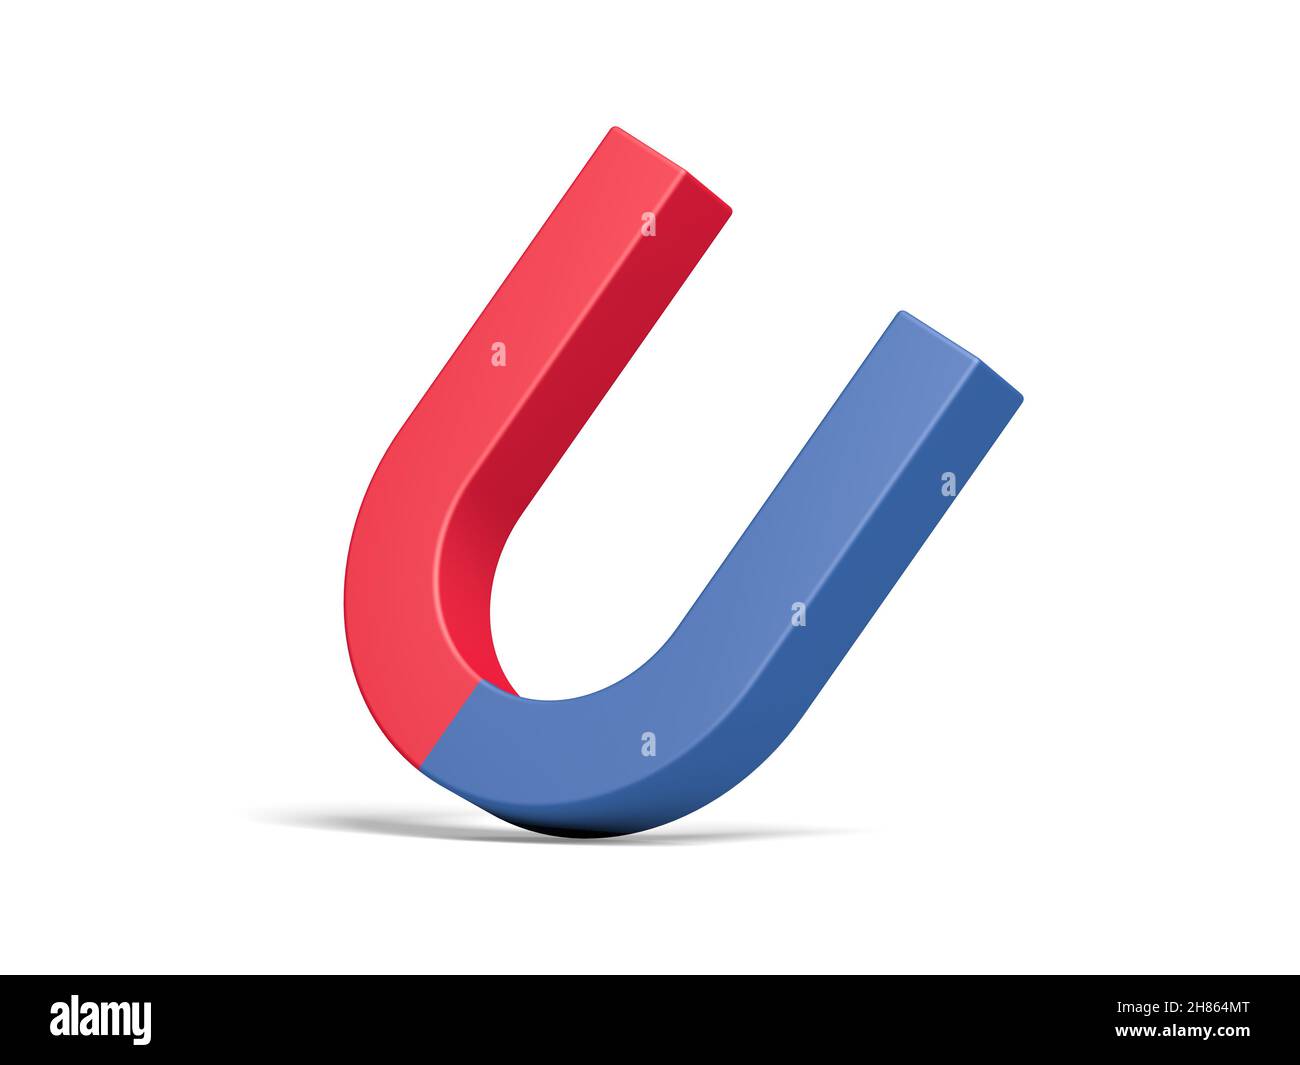 Magnet isolated on white background. Red and blue. 3d illustration. Stock Photo